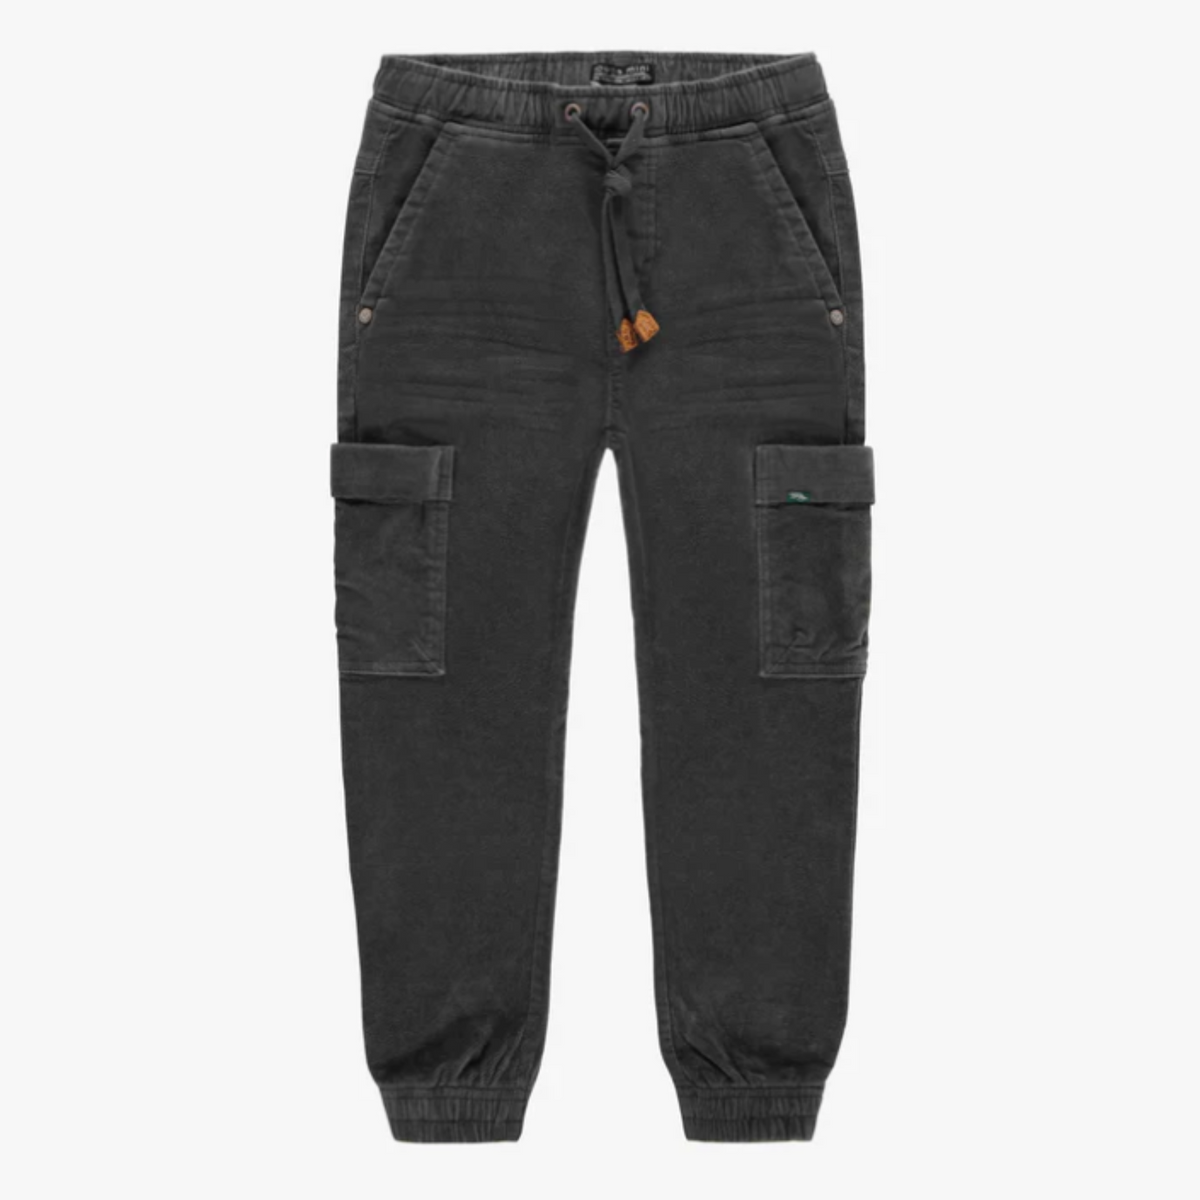 Grey Slim Fit Pants with Cargo Pockets in Velvet, Child